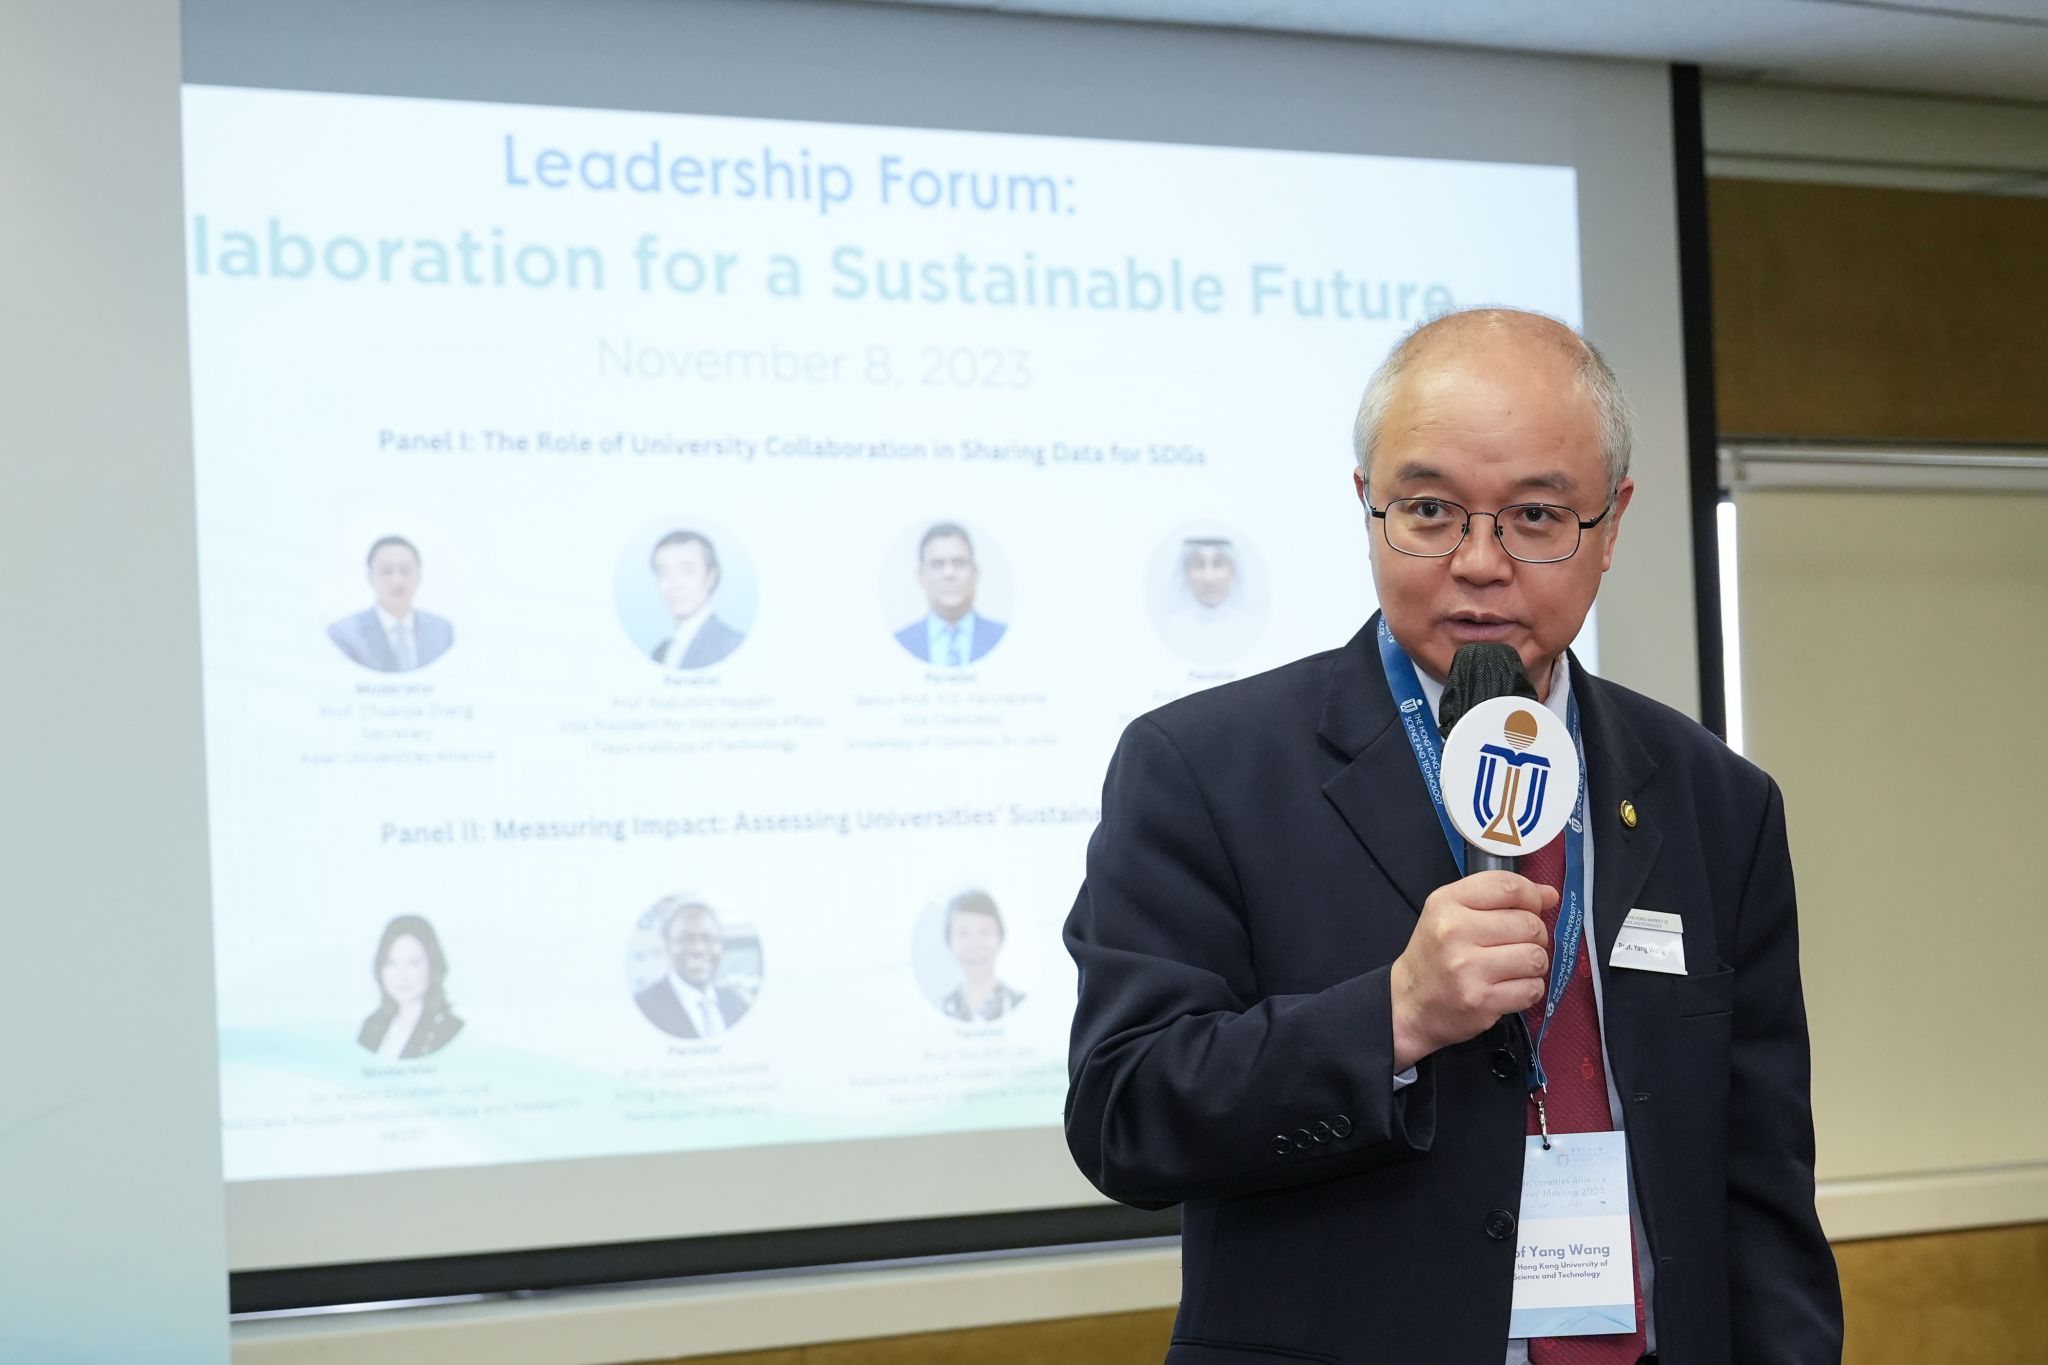 HKUST  Vice-President for Institutional Advancement Prof. WANG Yang delivered the opening remarks at the Leadership Forum.